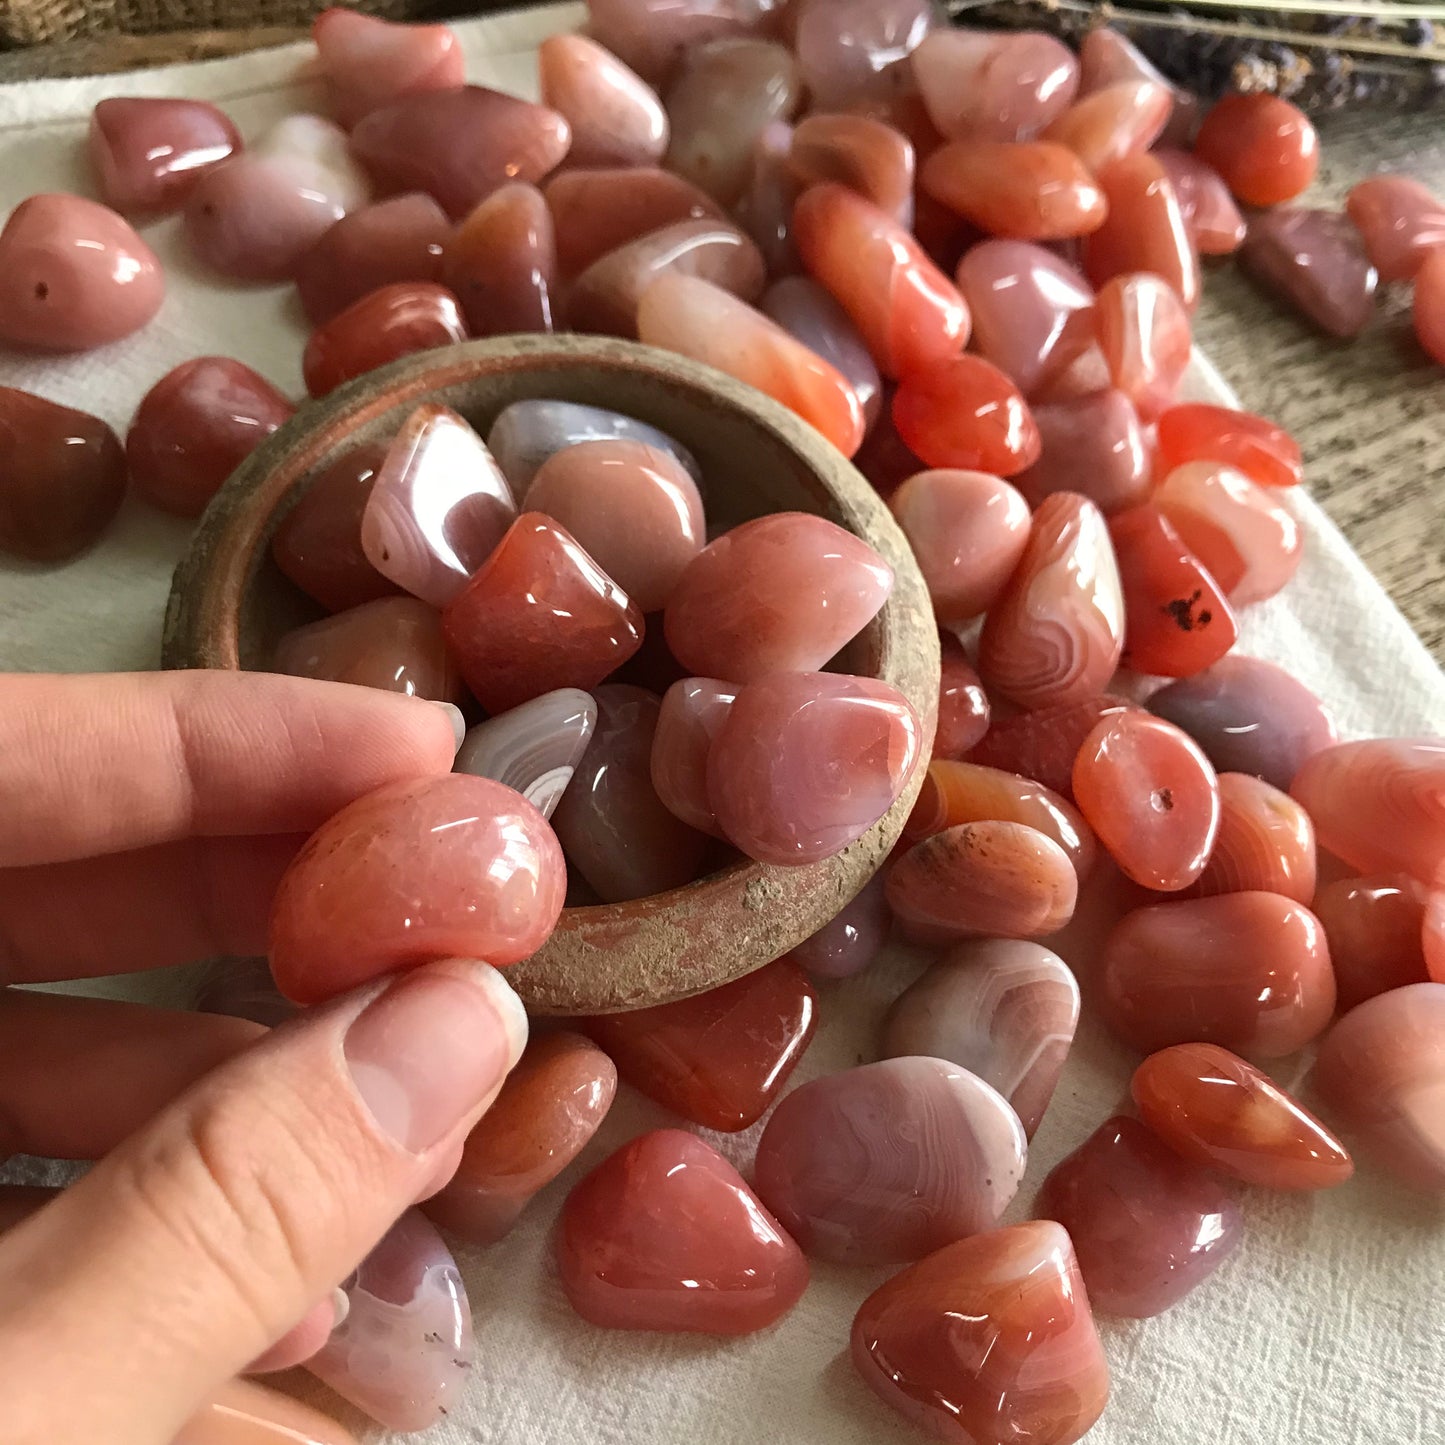 Peach Botzwana Agate Tumbled Polished (Approx 5/8" - 1") Polished Stone for Crystal Grid, Wire Wrapping or Craft Supply BIN-1346